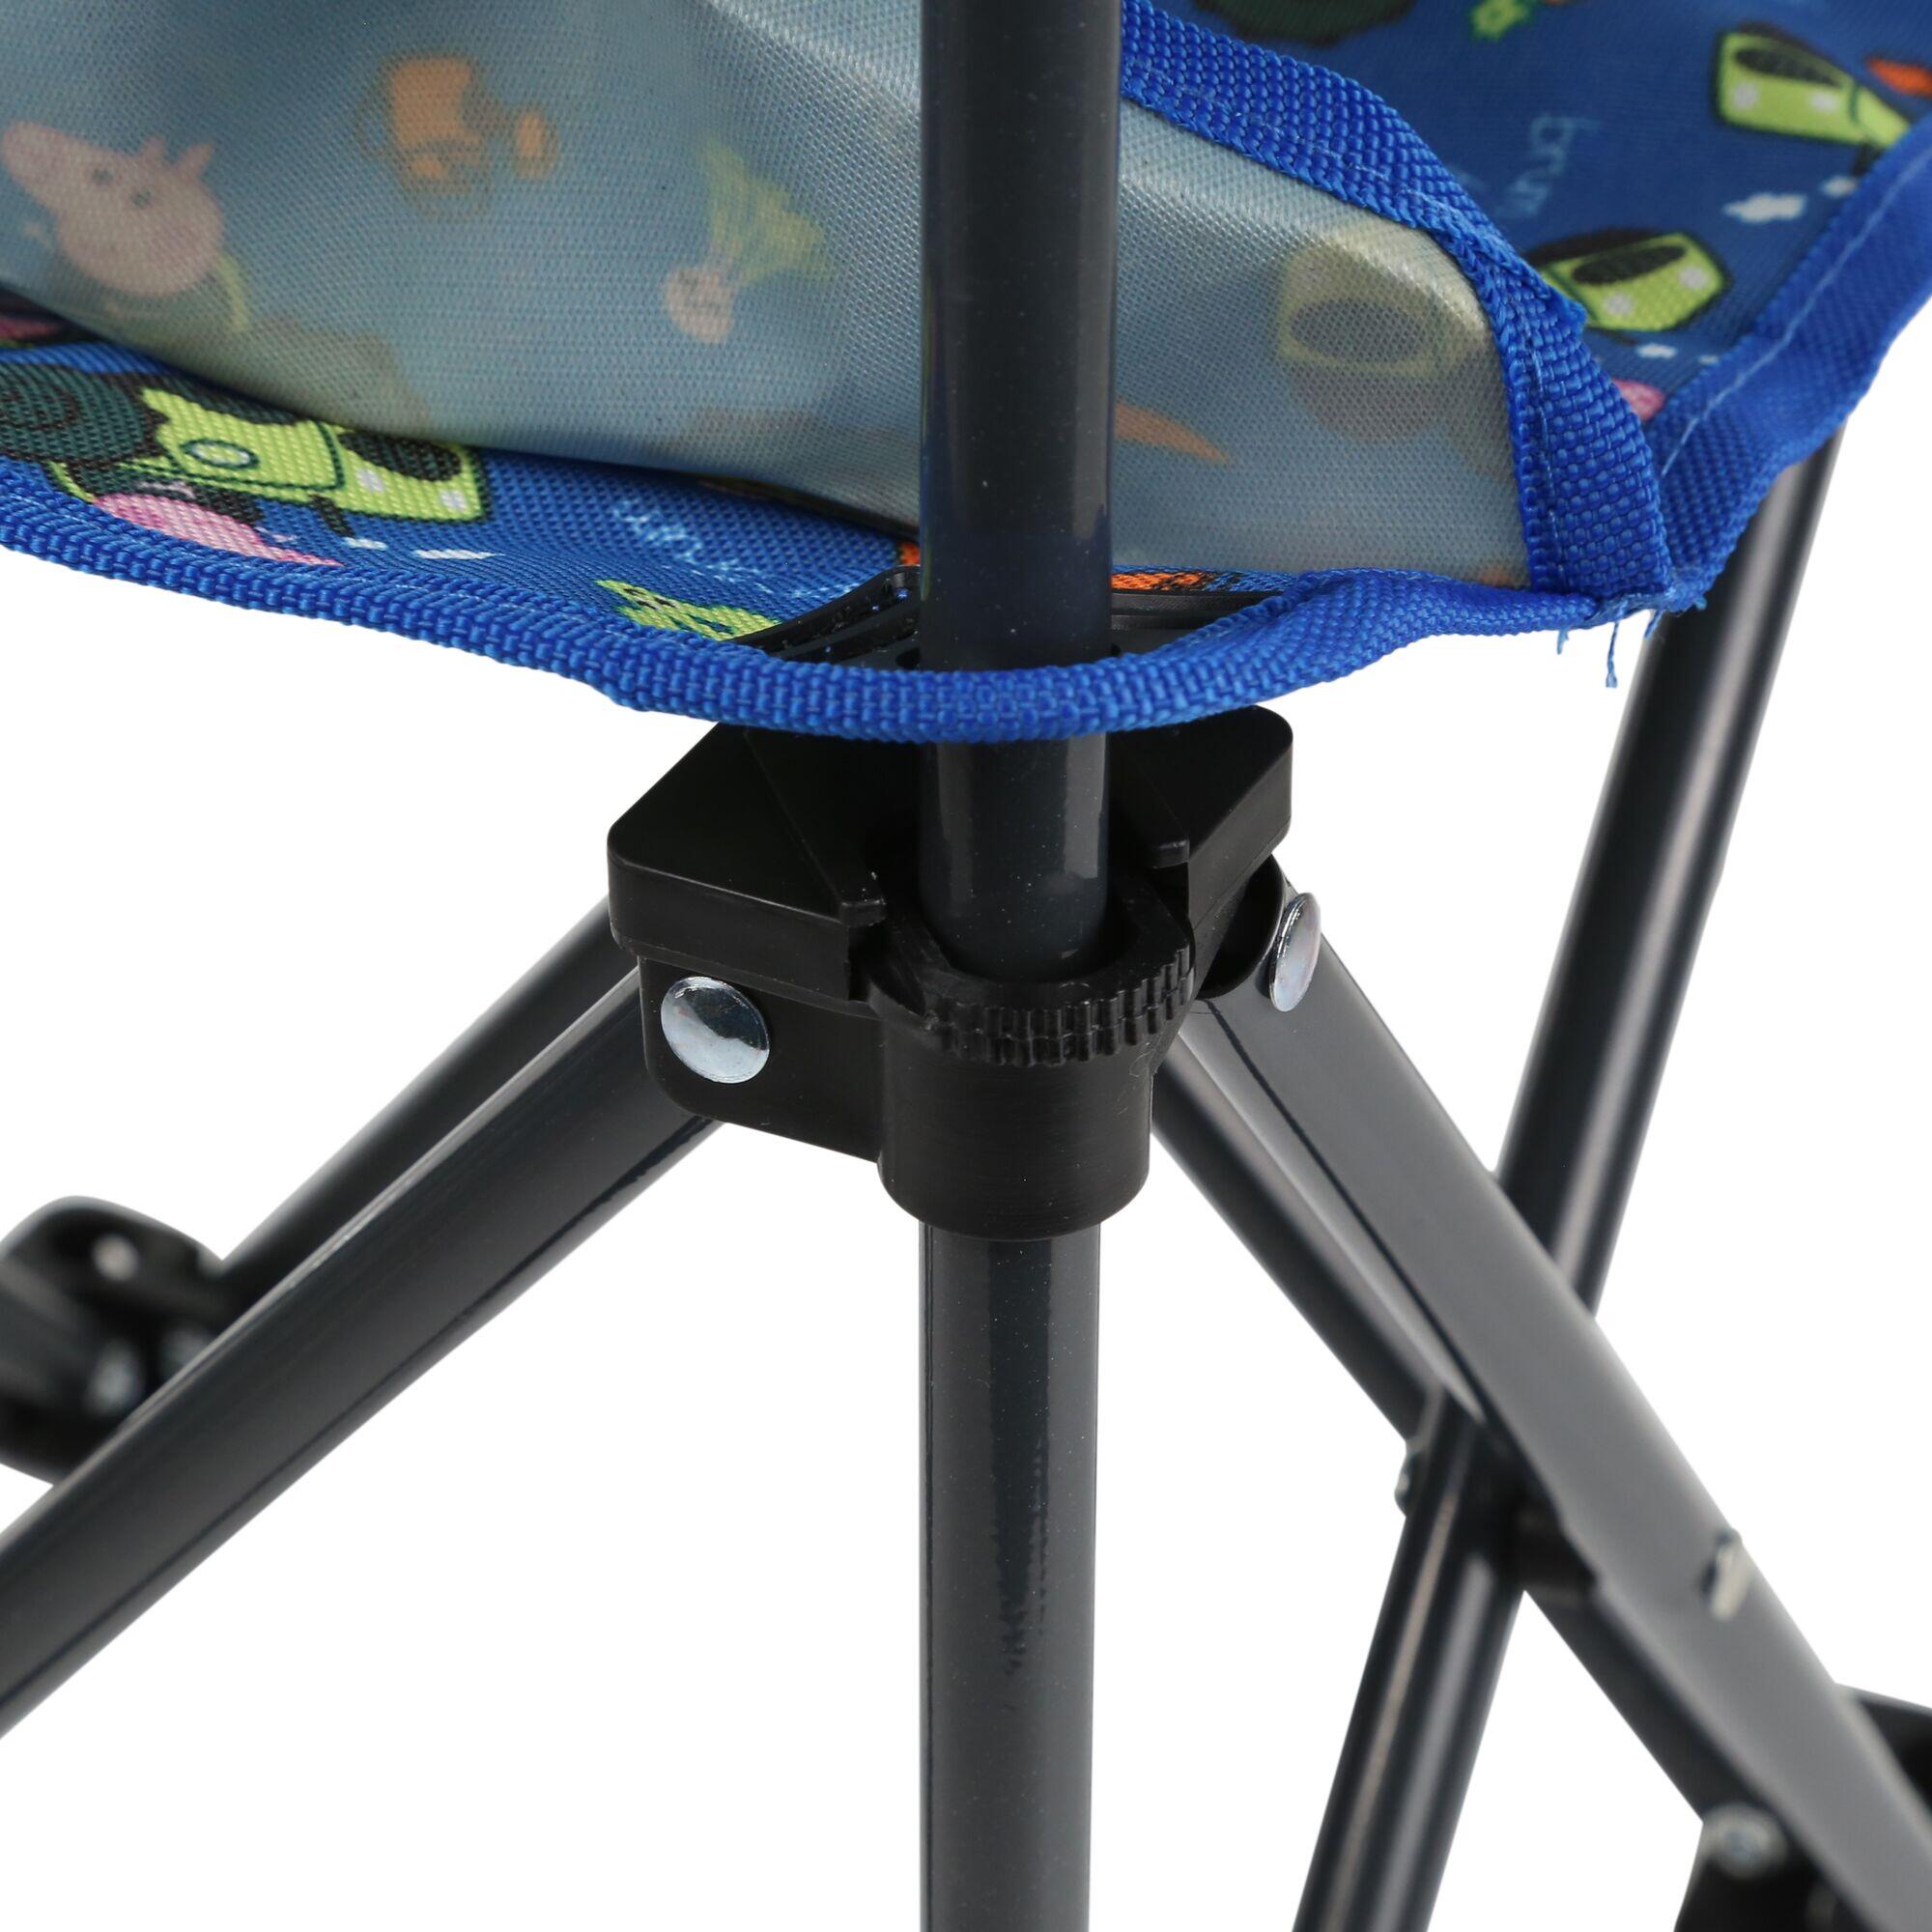 Peppa Pig Kids' Camping Chair - Blue Tractor 5/5